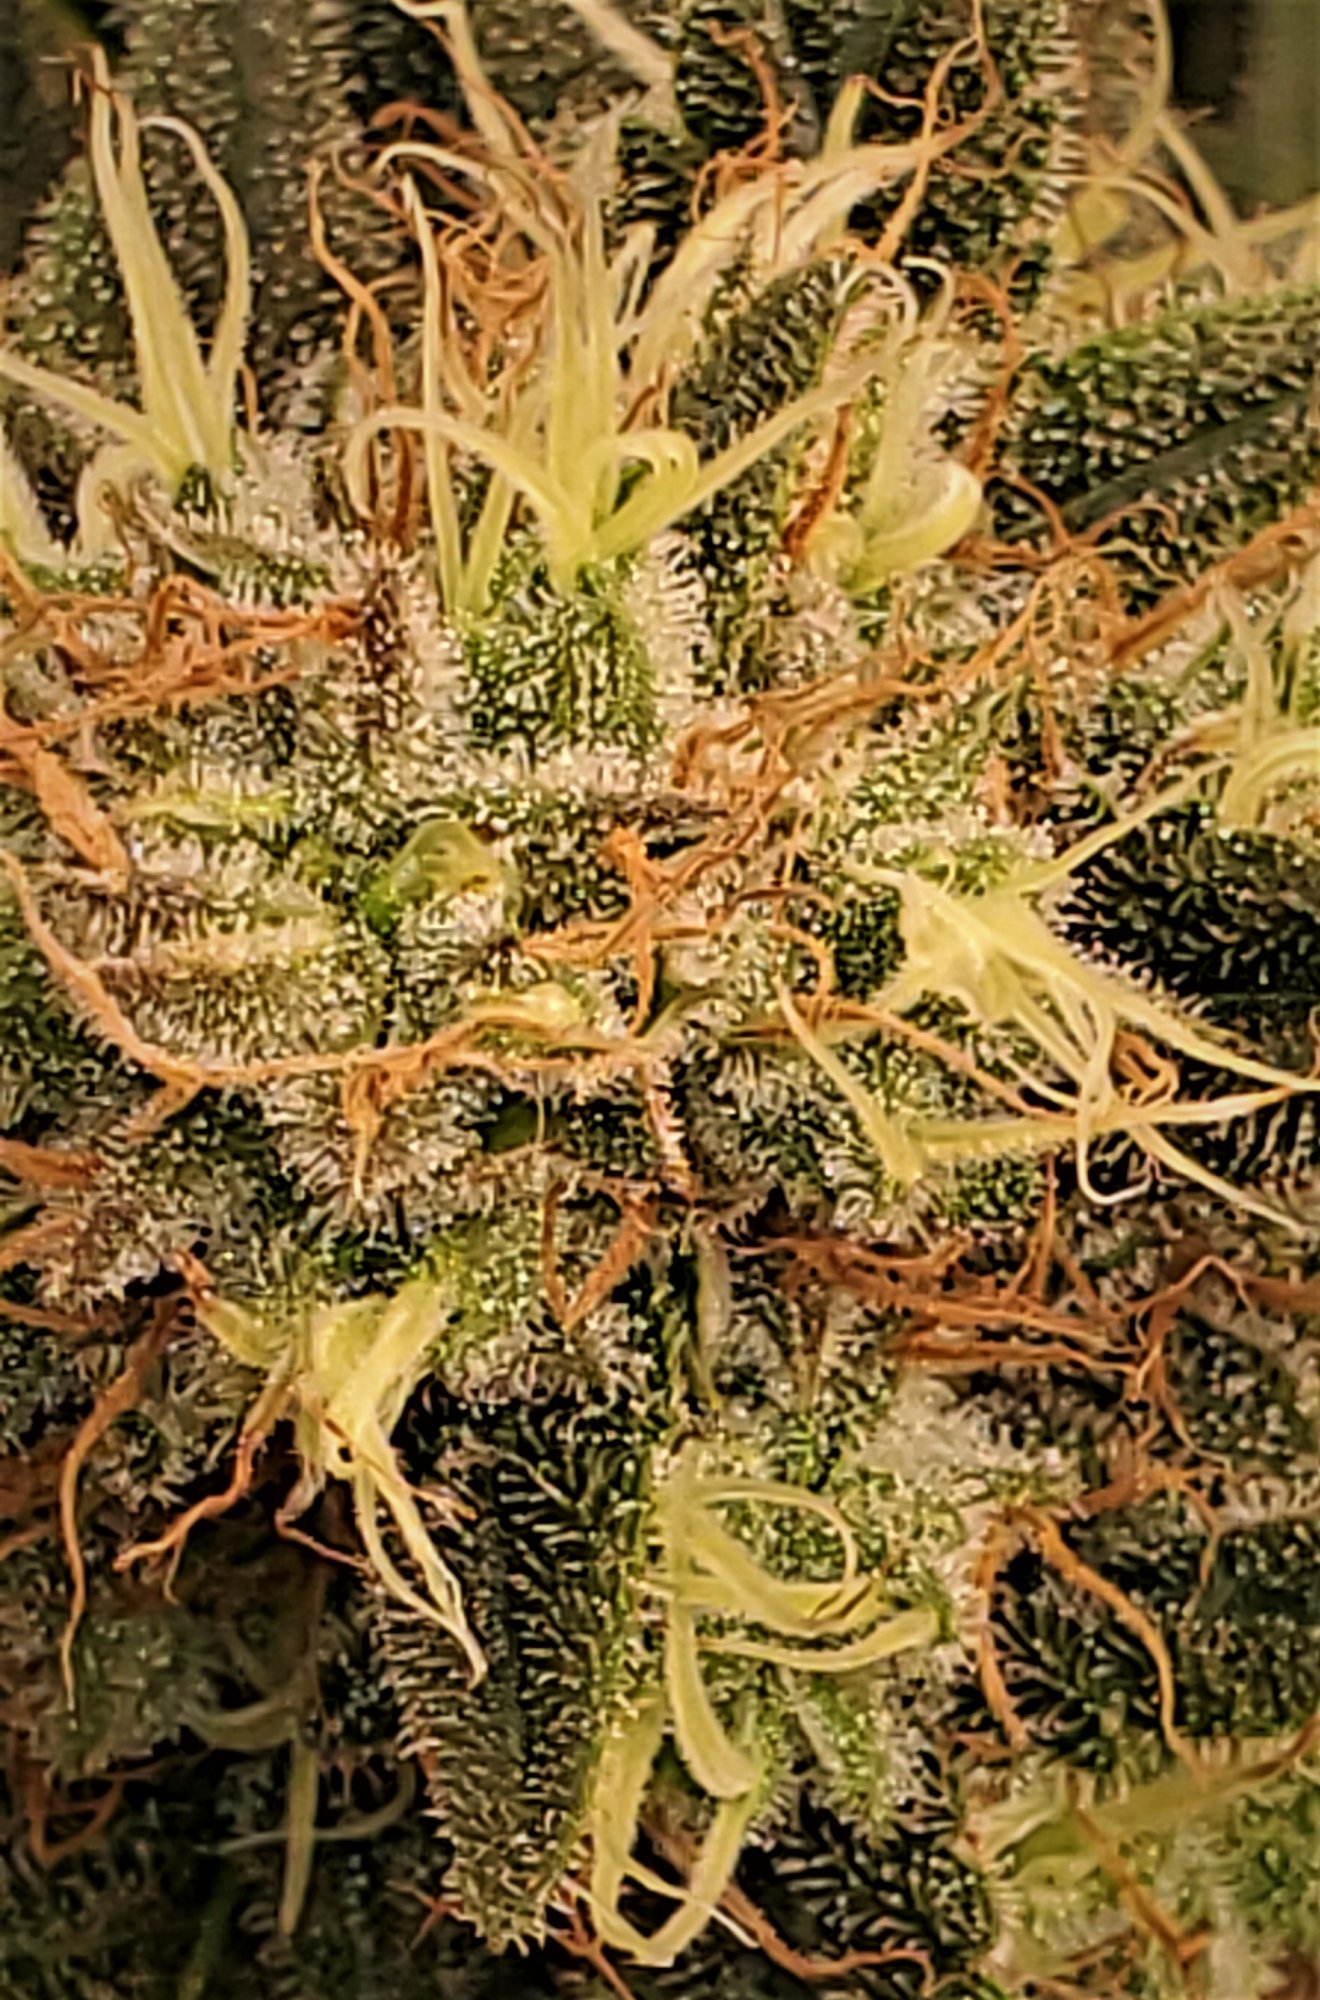 Amber trichomes over 50 at day 45 of flowering ready 8